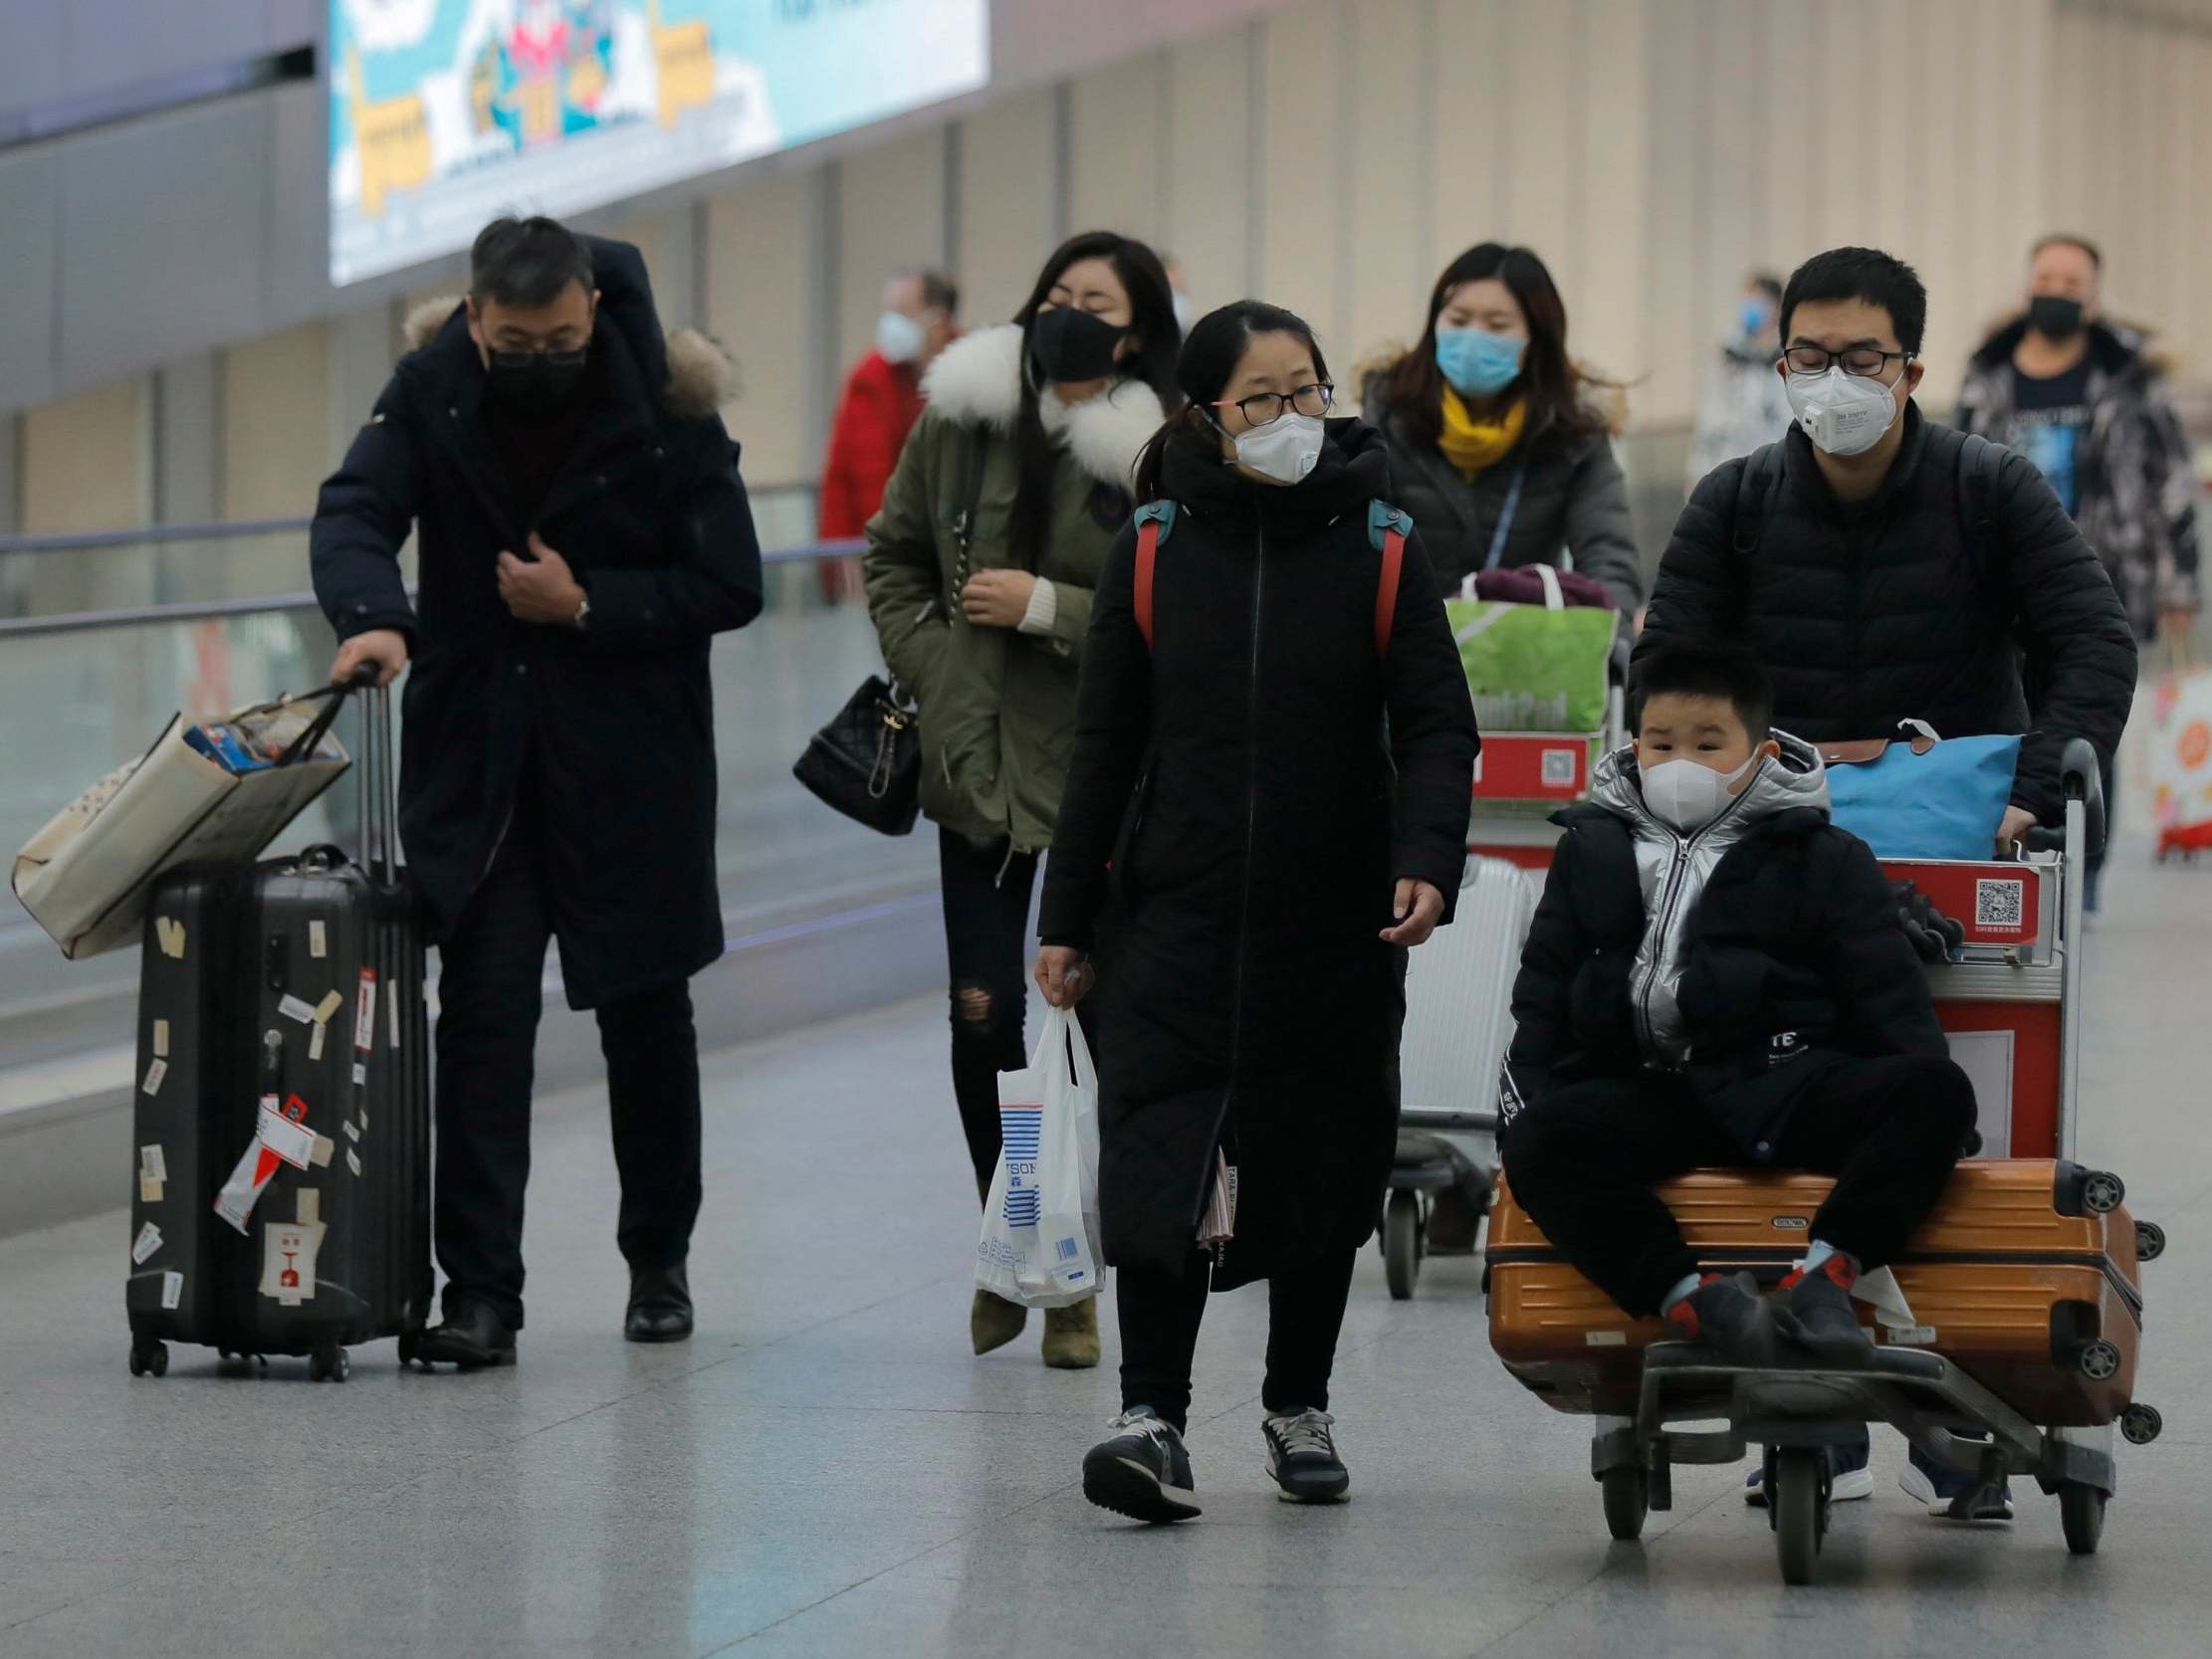 Coronavirus: France will evacuate its citizens from China's Wuhan by airplane, health ministry confirms